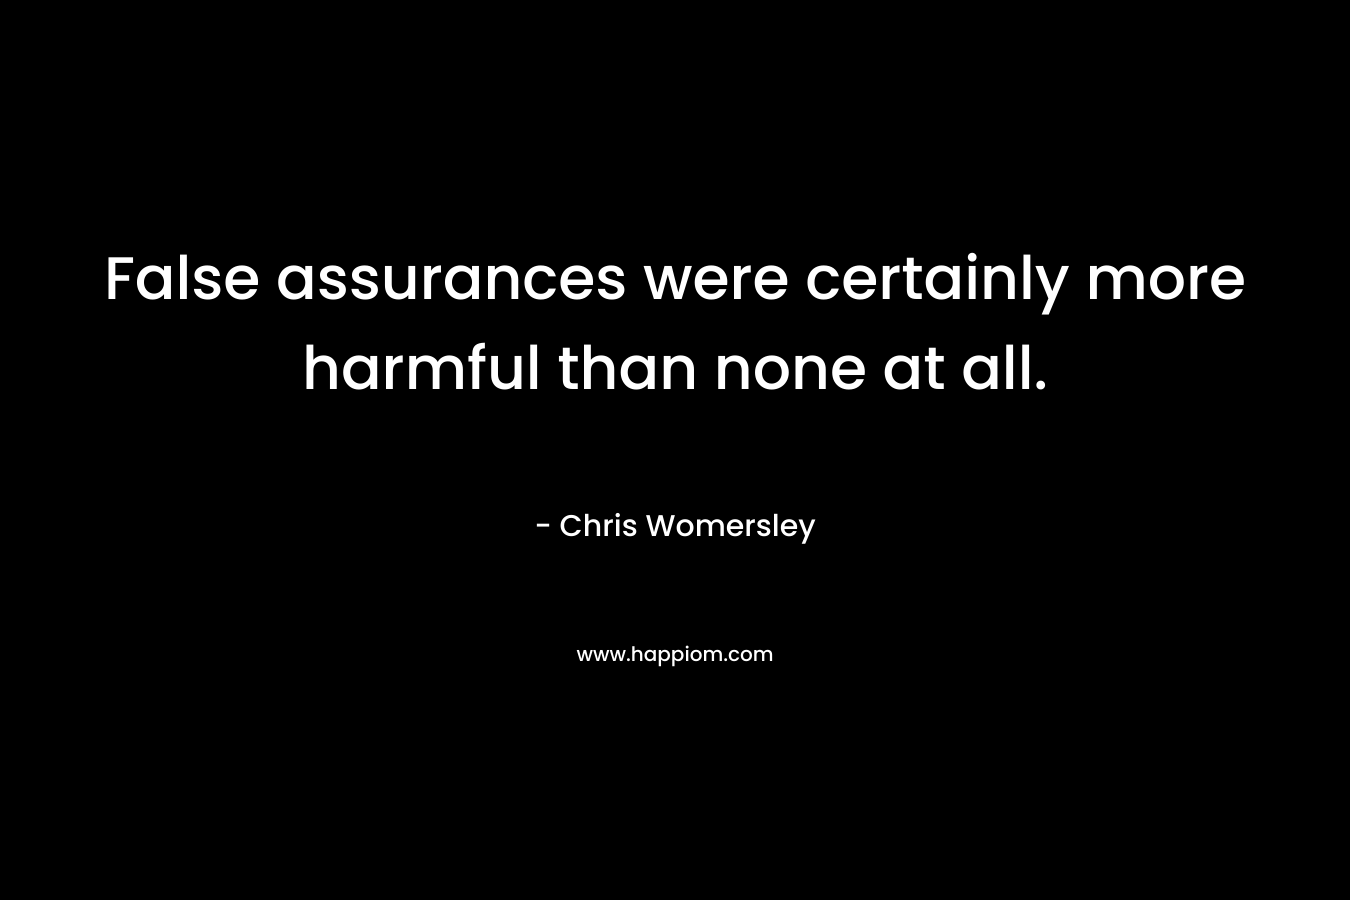 False assurances were certainly more harmful than none at all. – Chris Womersley